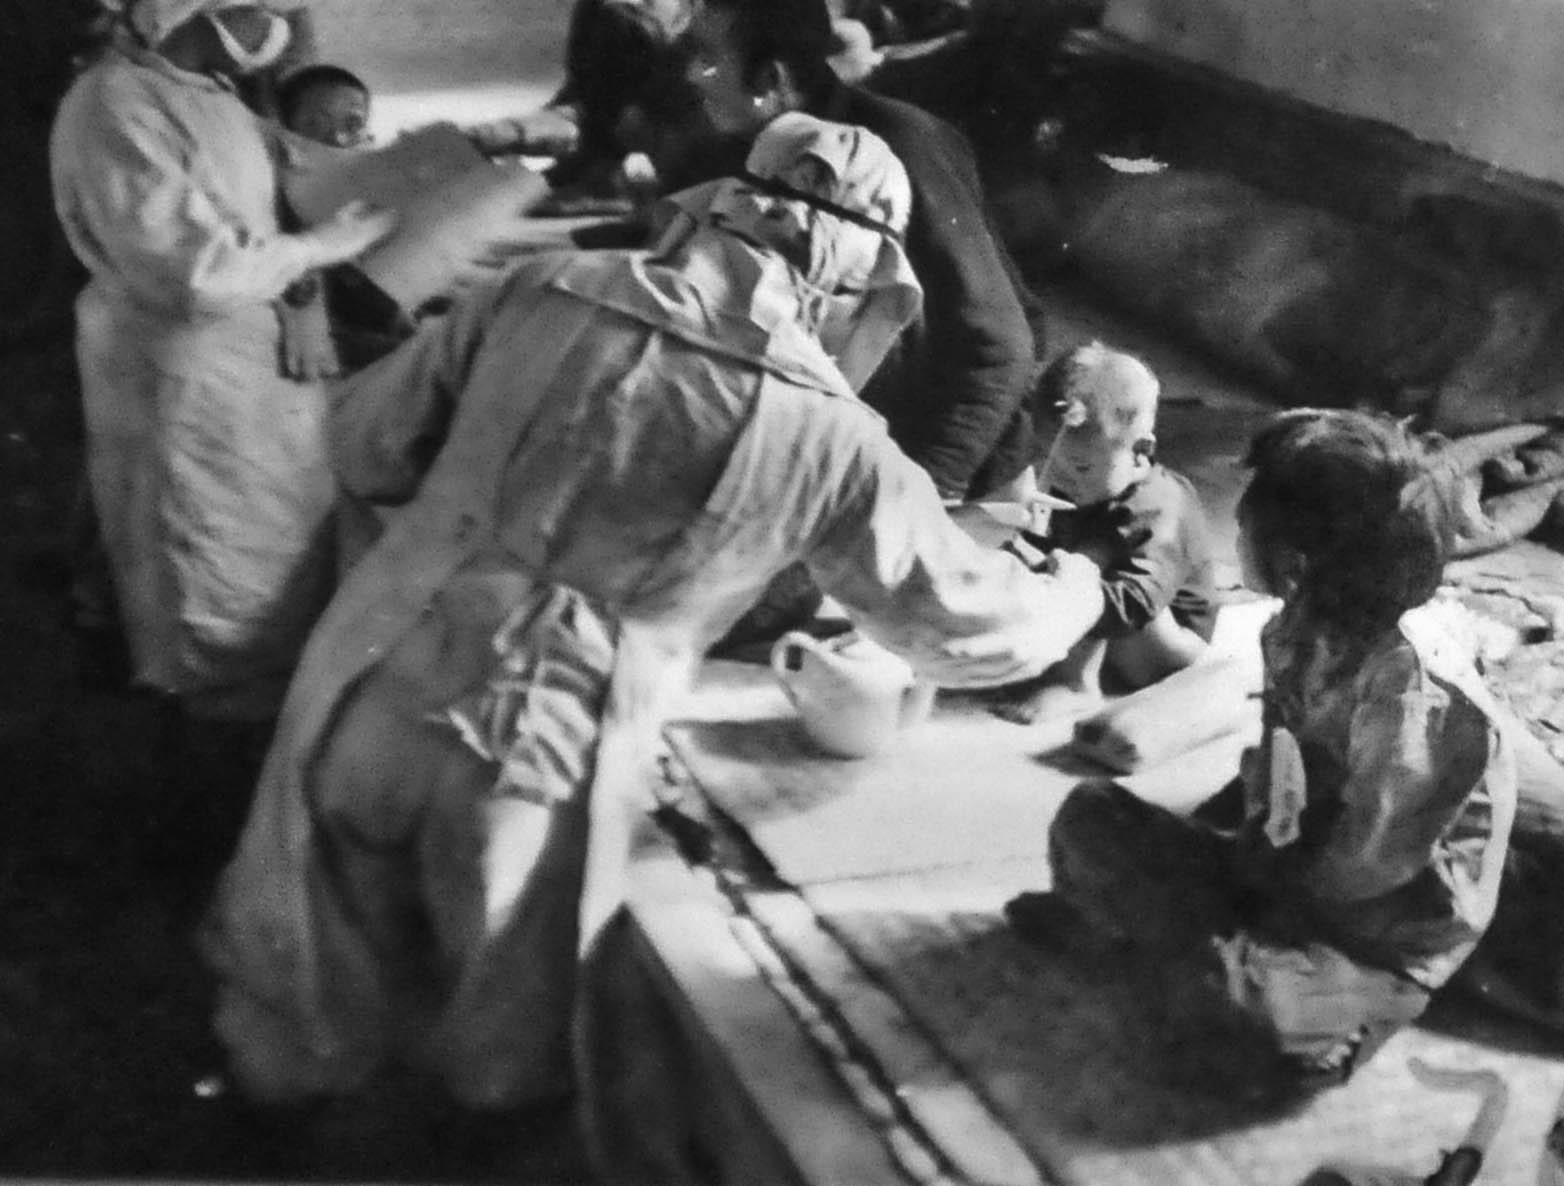 Chinese children were subjected to plaque-prevention experiments by Unit 731. Other experiments involved typhus, anthrax, cholera, TB, encephalitis, and more. 